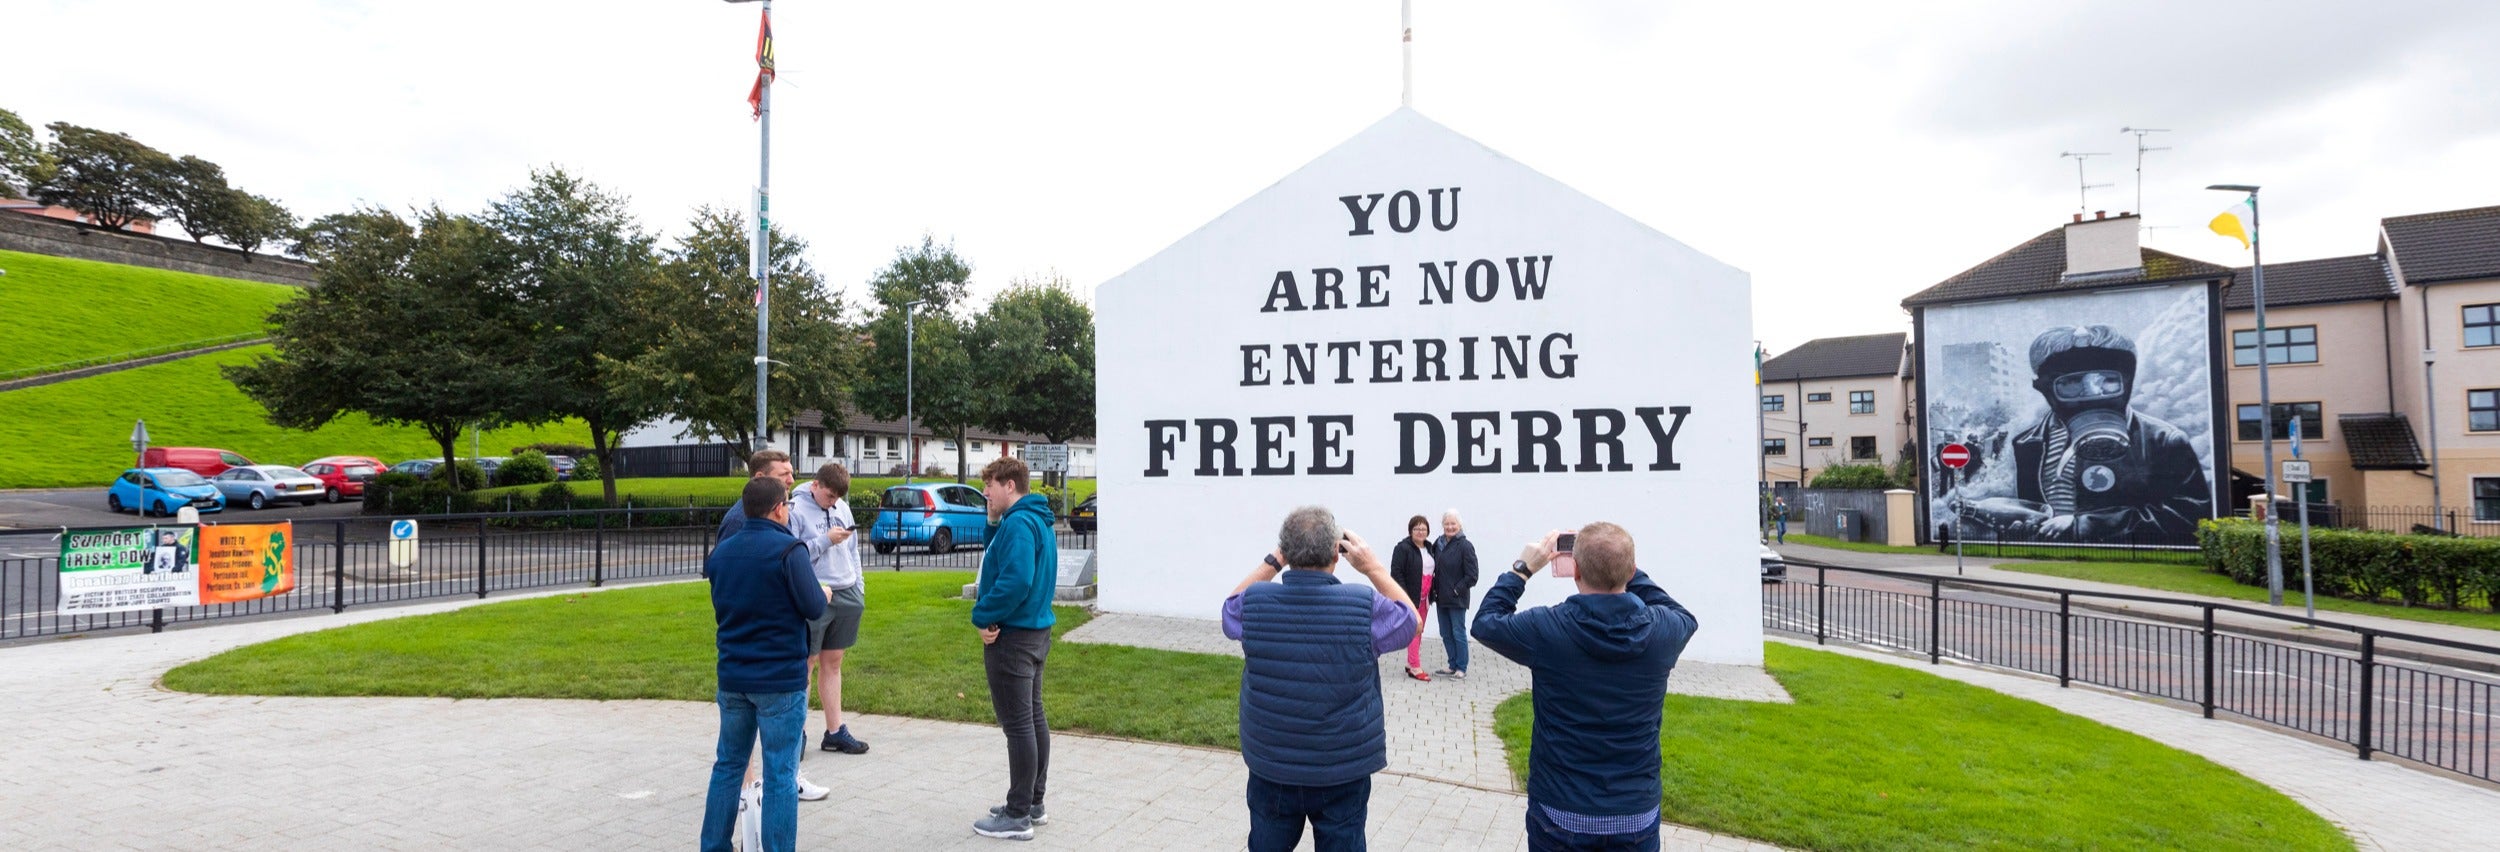 Museum of Free Derry Ticket